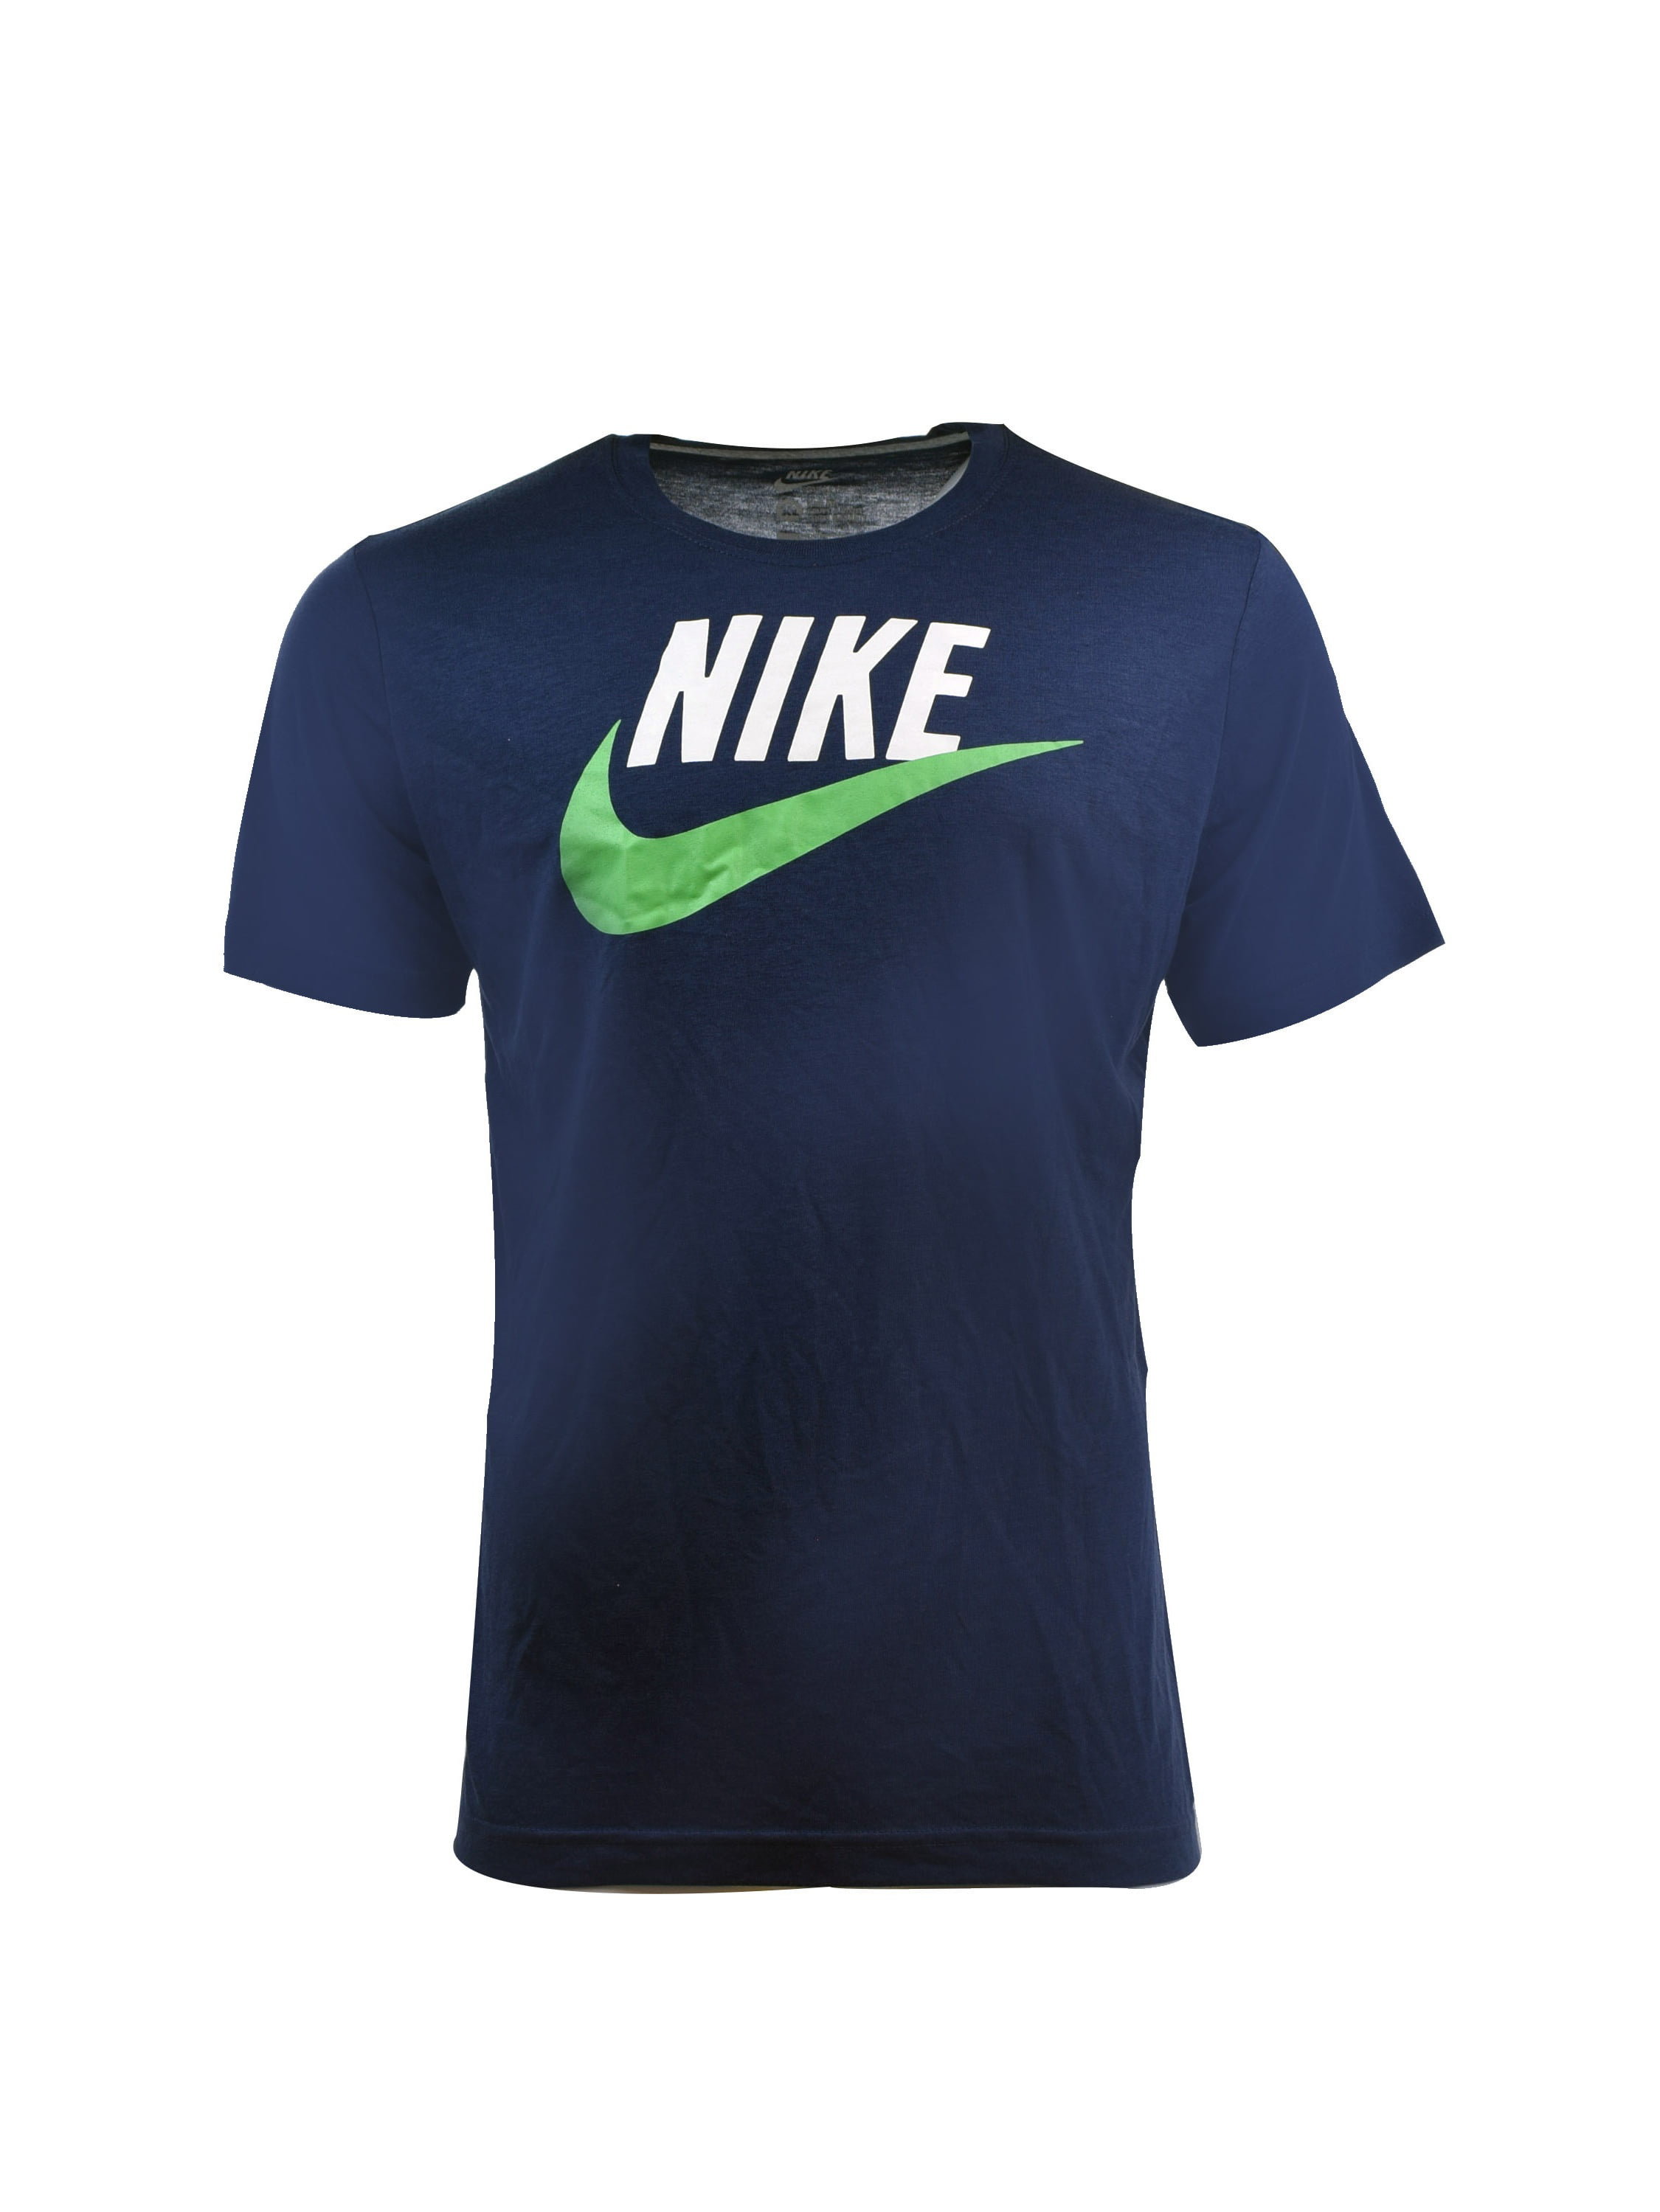 Navy Blue Nike Outfit | lupon.gov.ph